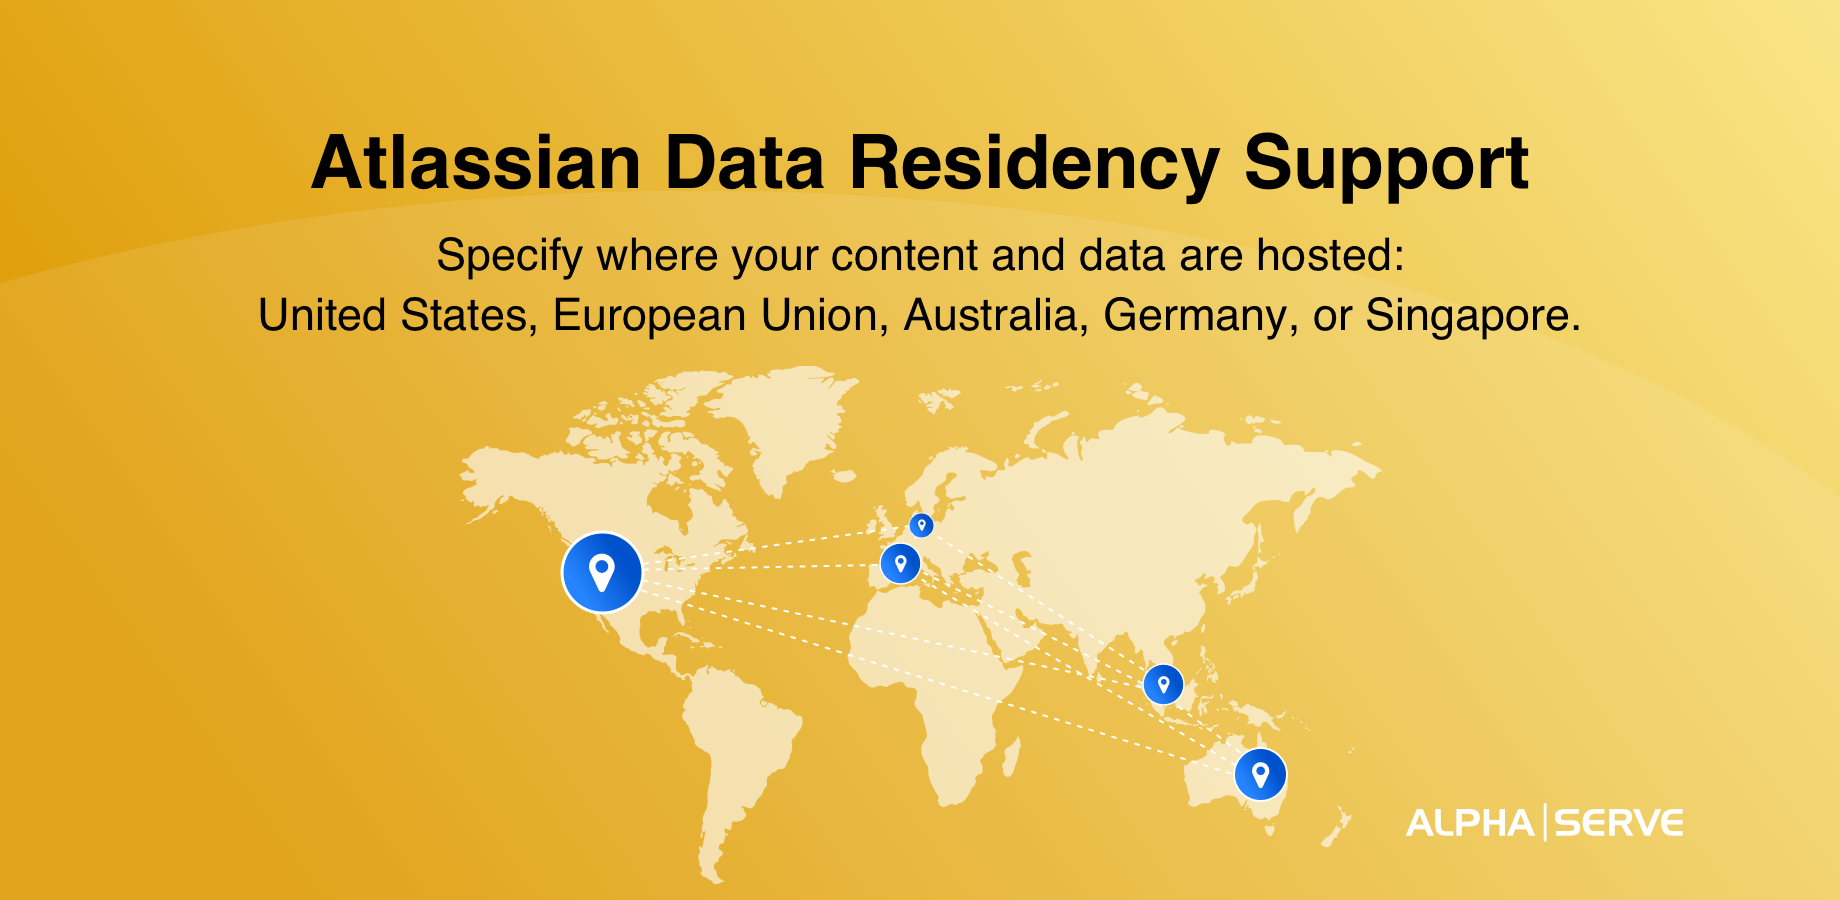 Power BI Connector for Jira Now Offers Atlassian Data Residency Support